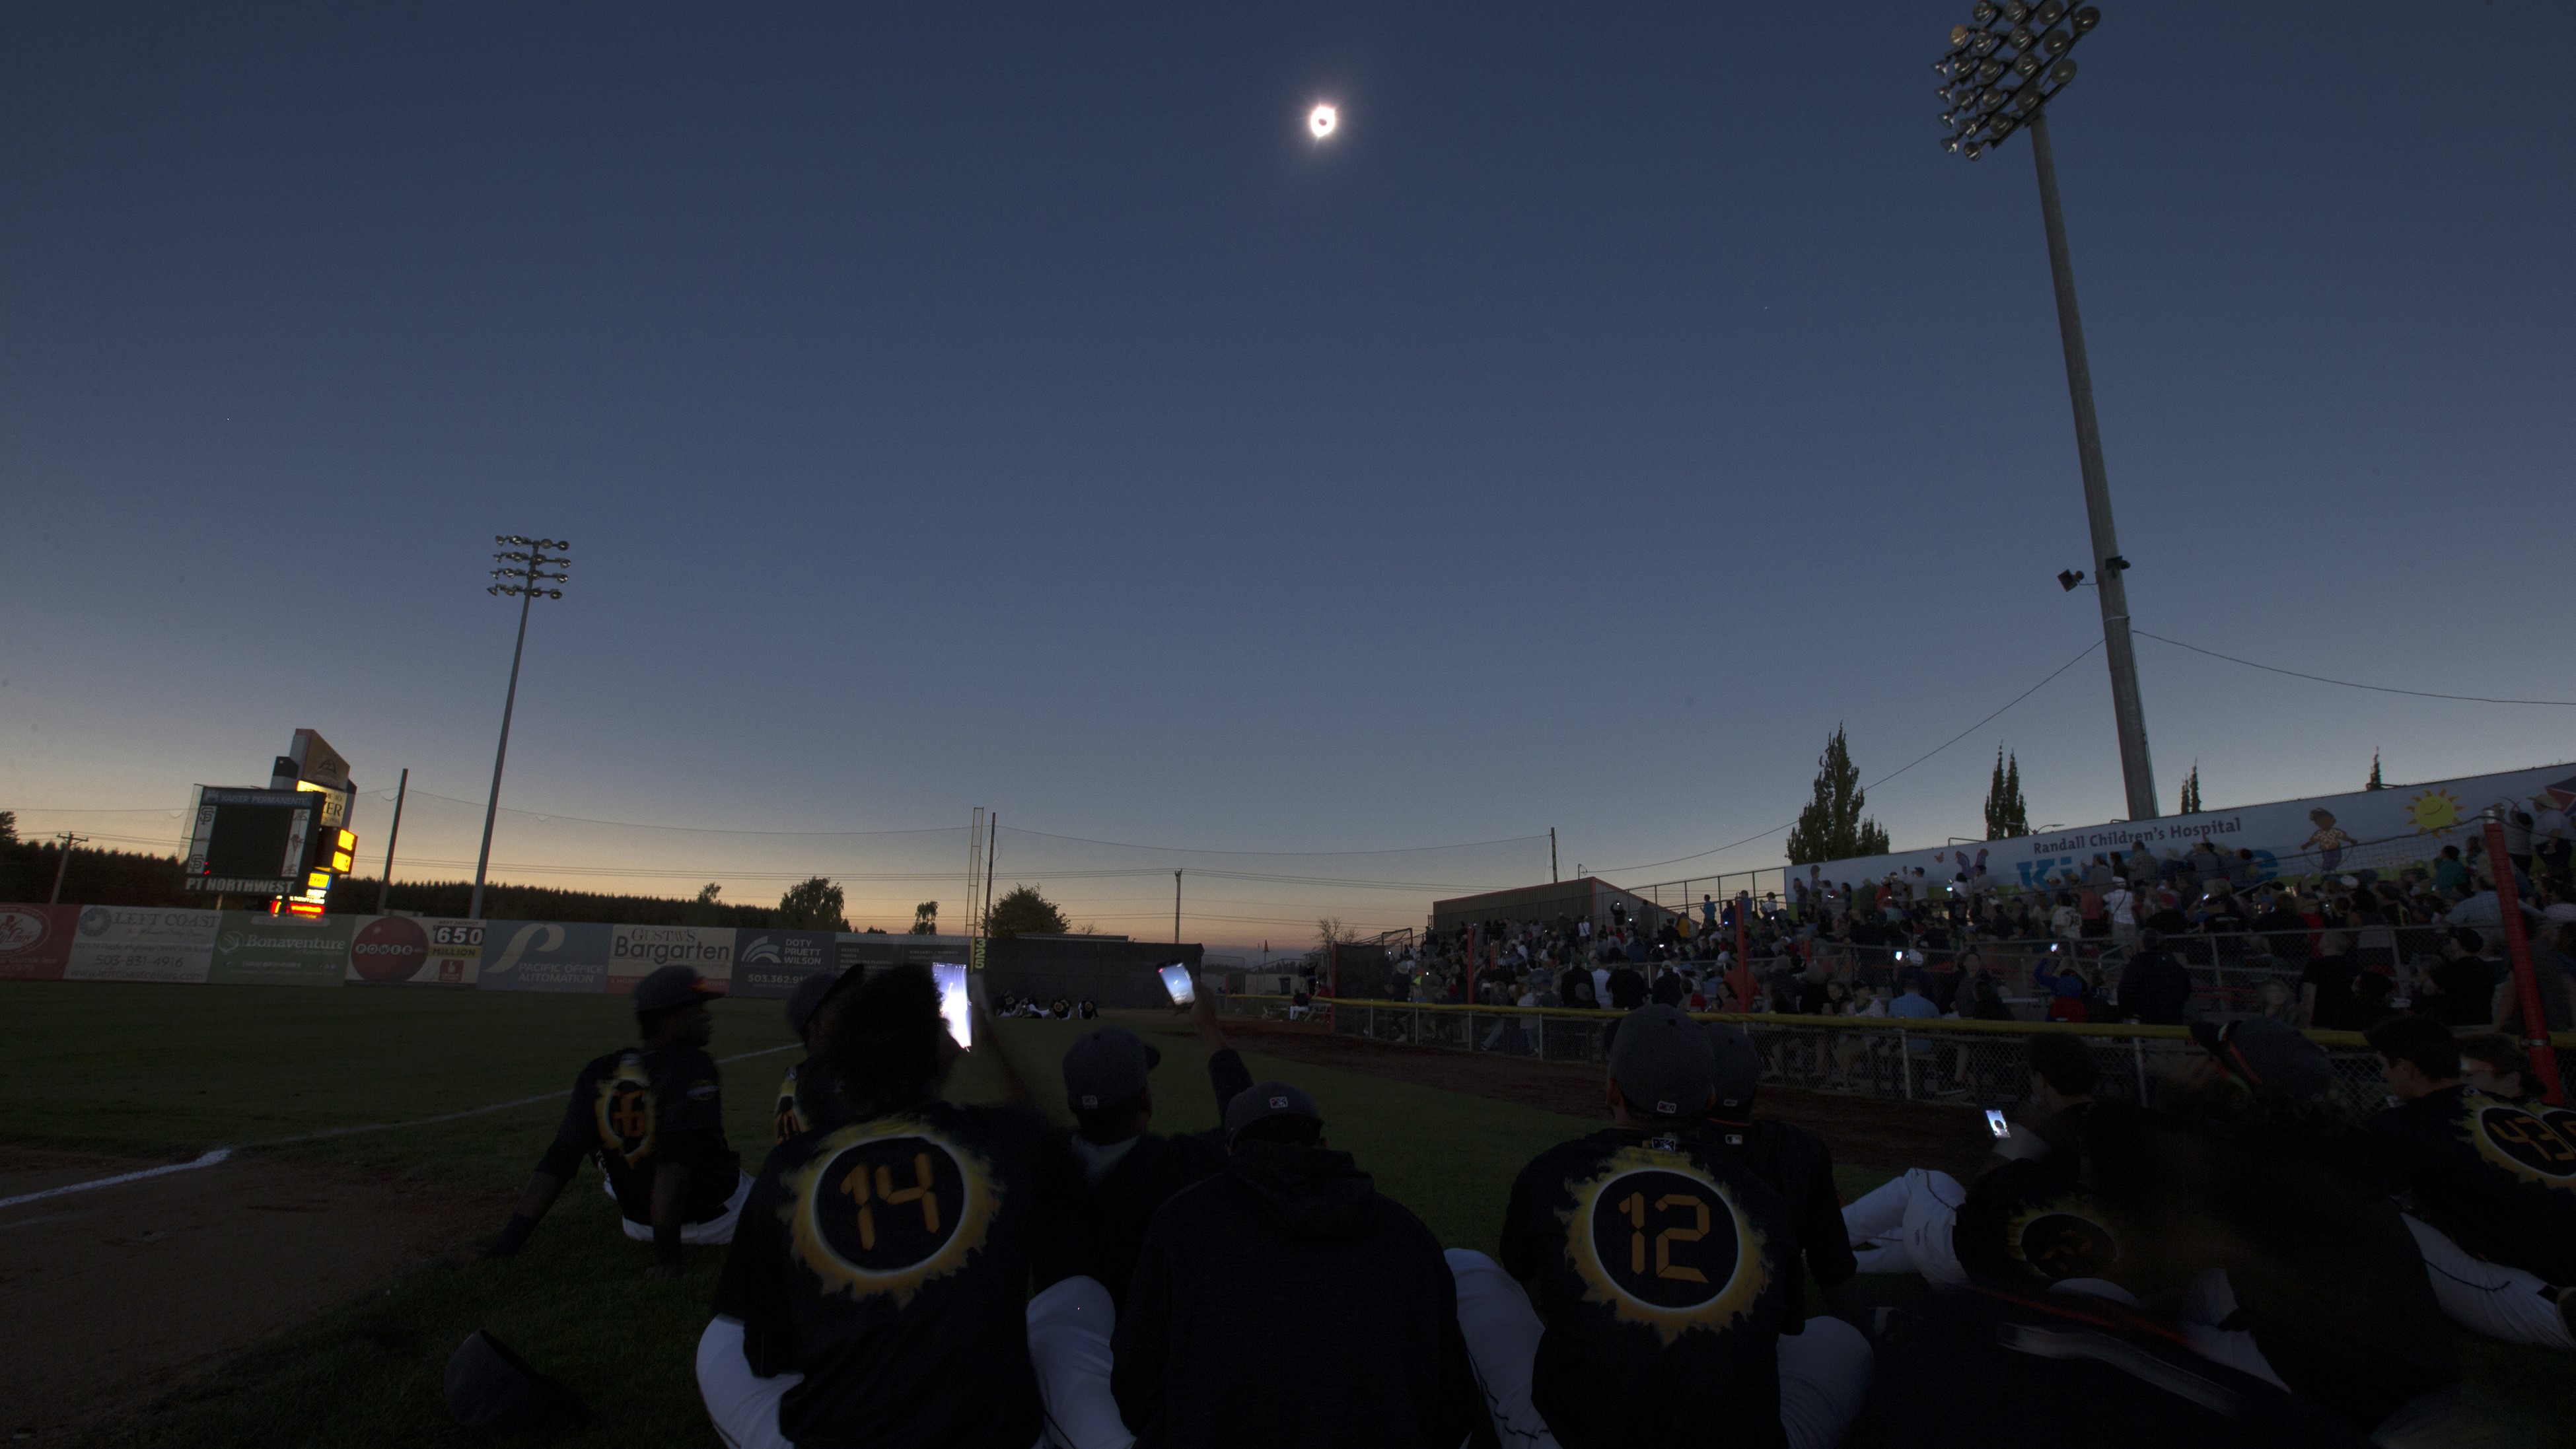 April 8’s total solar eclipse will make baseball history. Here’s how Space